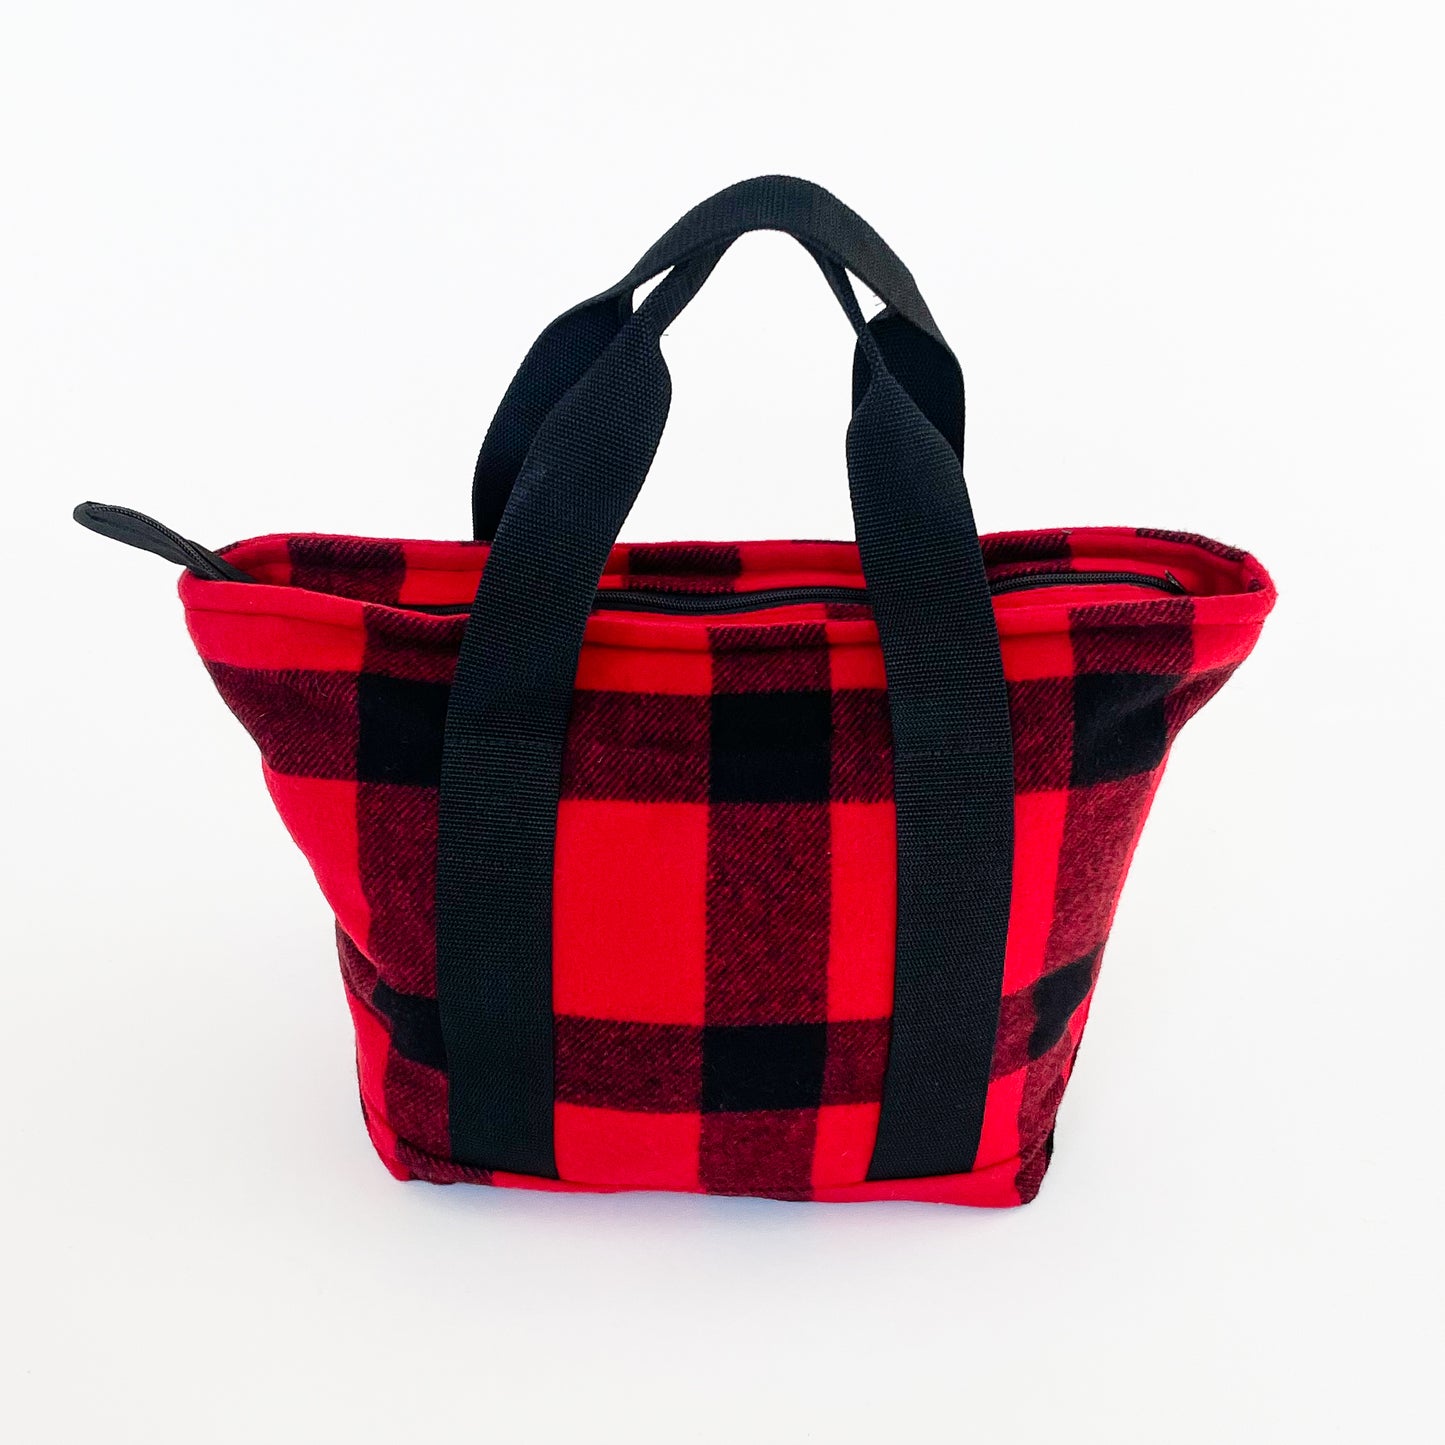  Wool bucket tote bag, large red and black plaid, shows fully zipped top and nylon straps